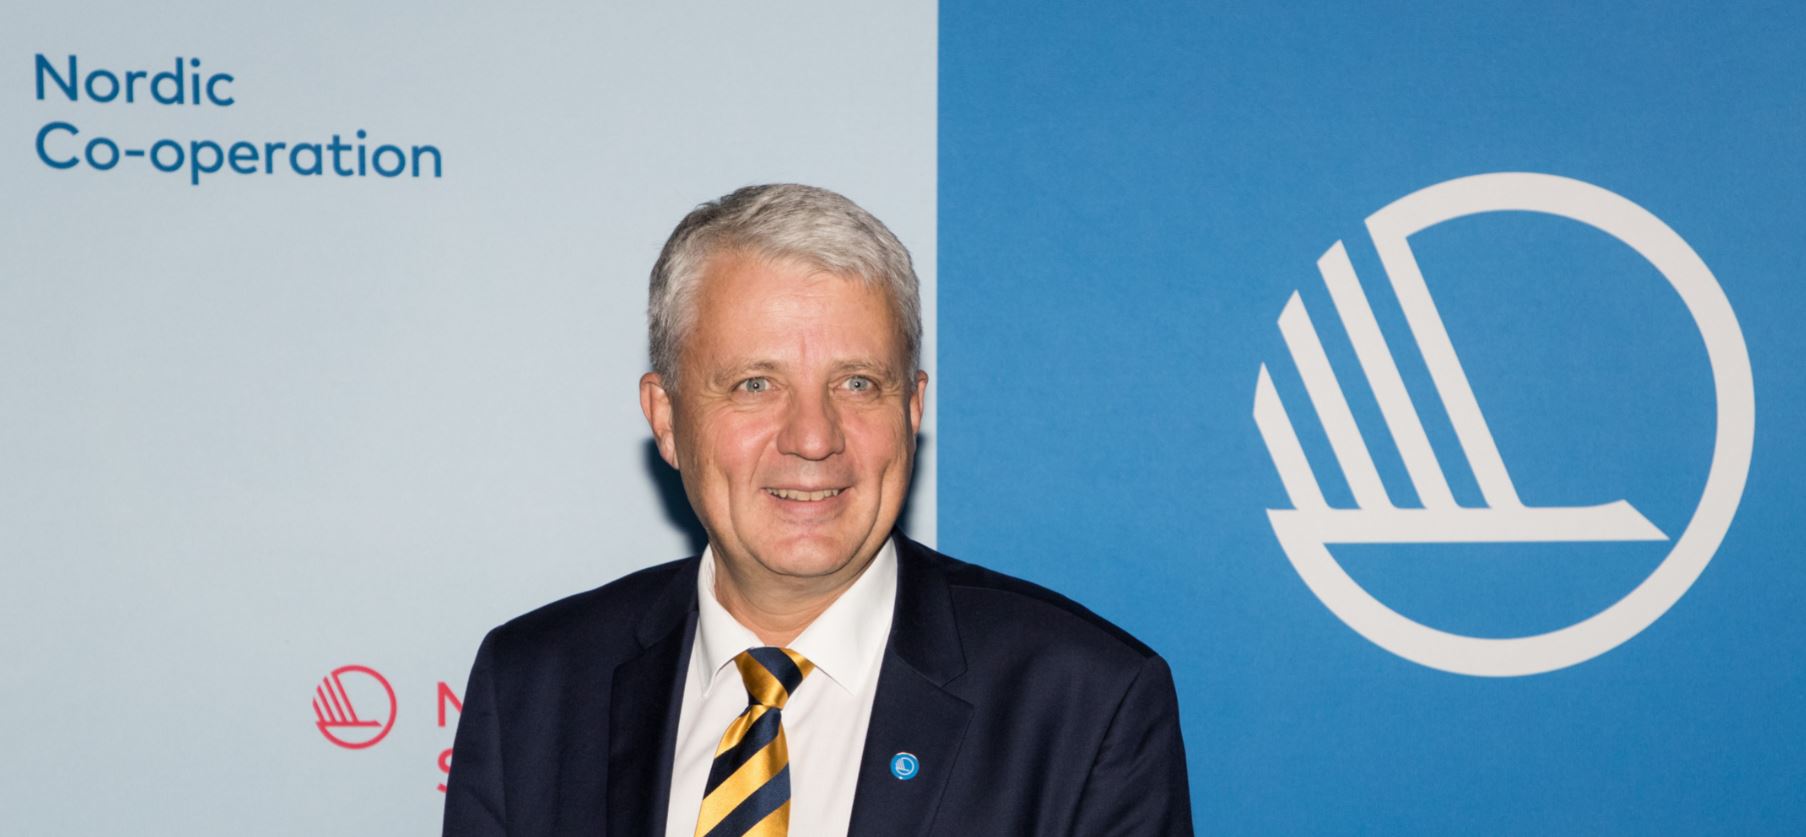 Outgoing Secretary General: keep the Nordic focus